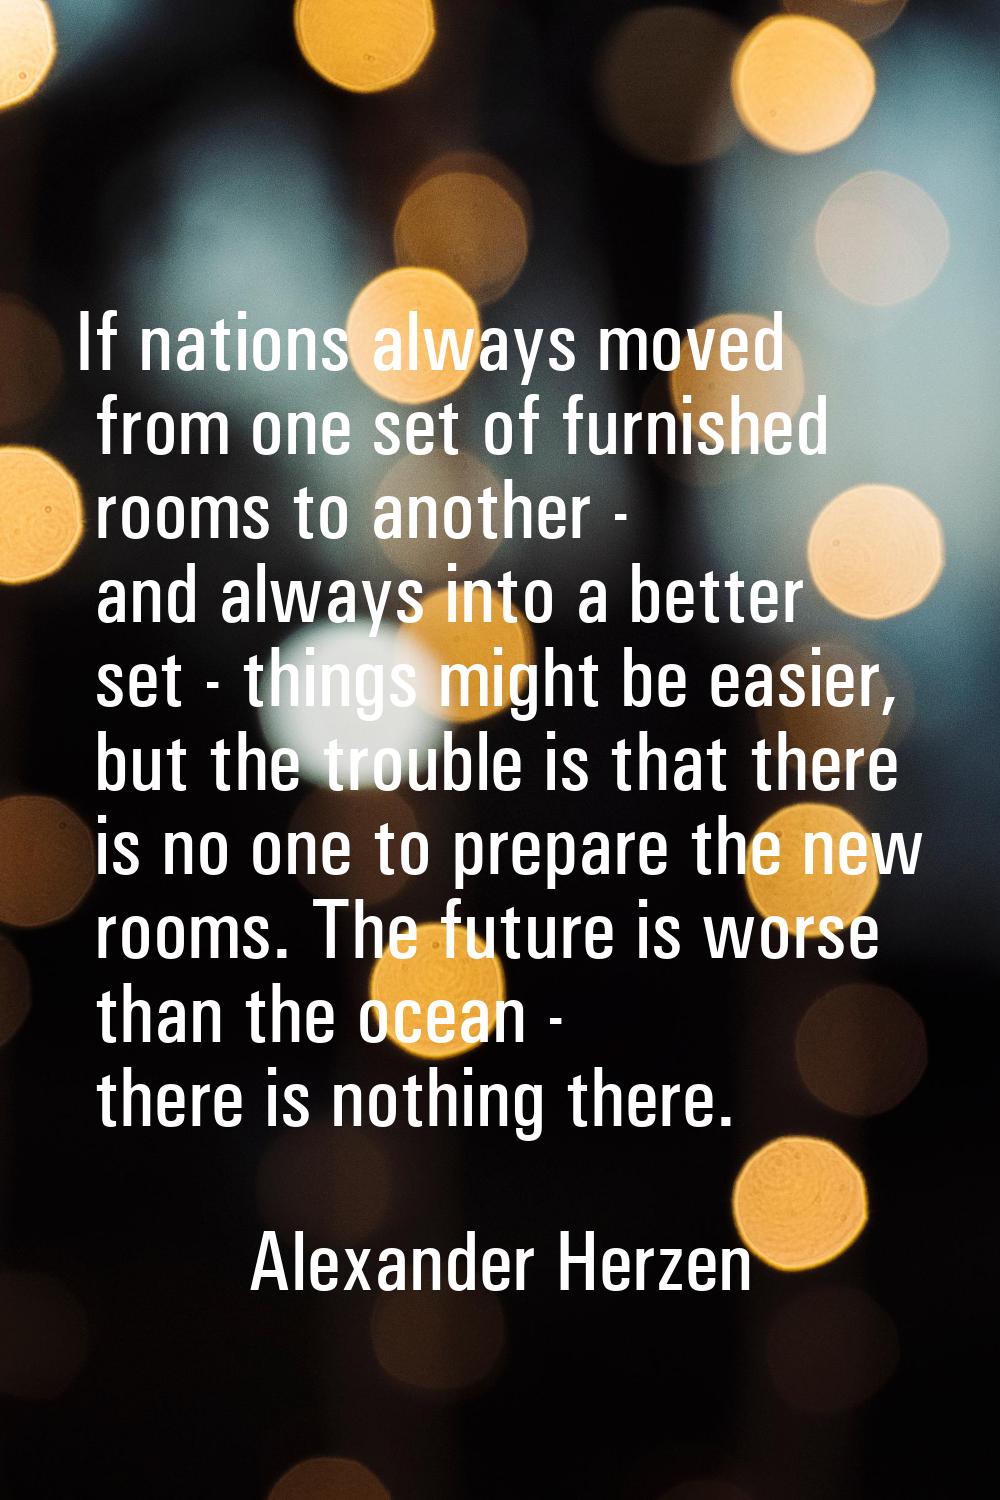 If nations always moved from one set of furnished rooms to another - and always into a better set -